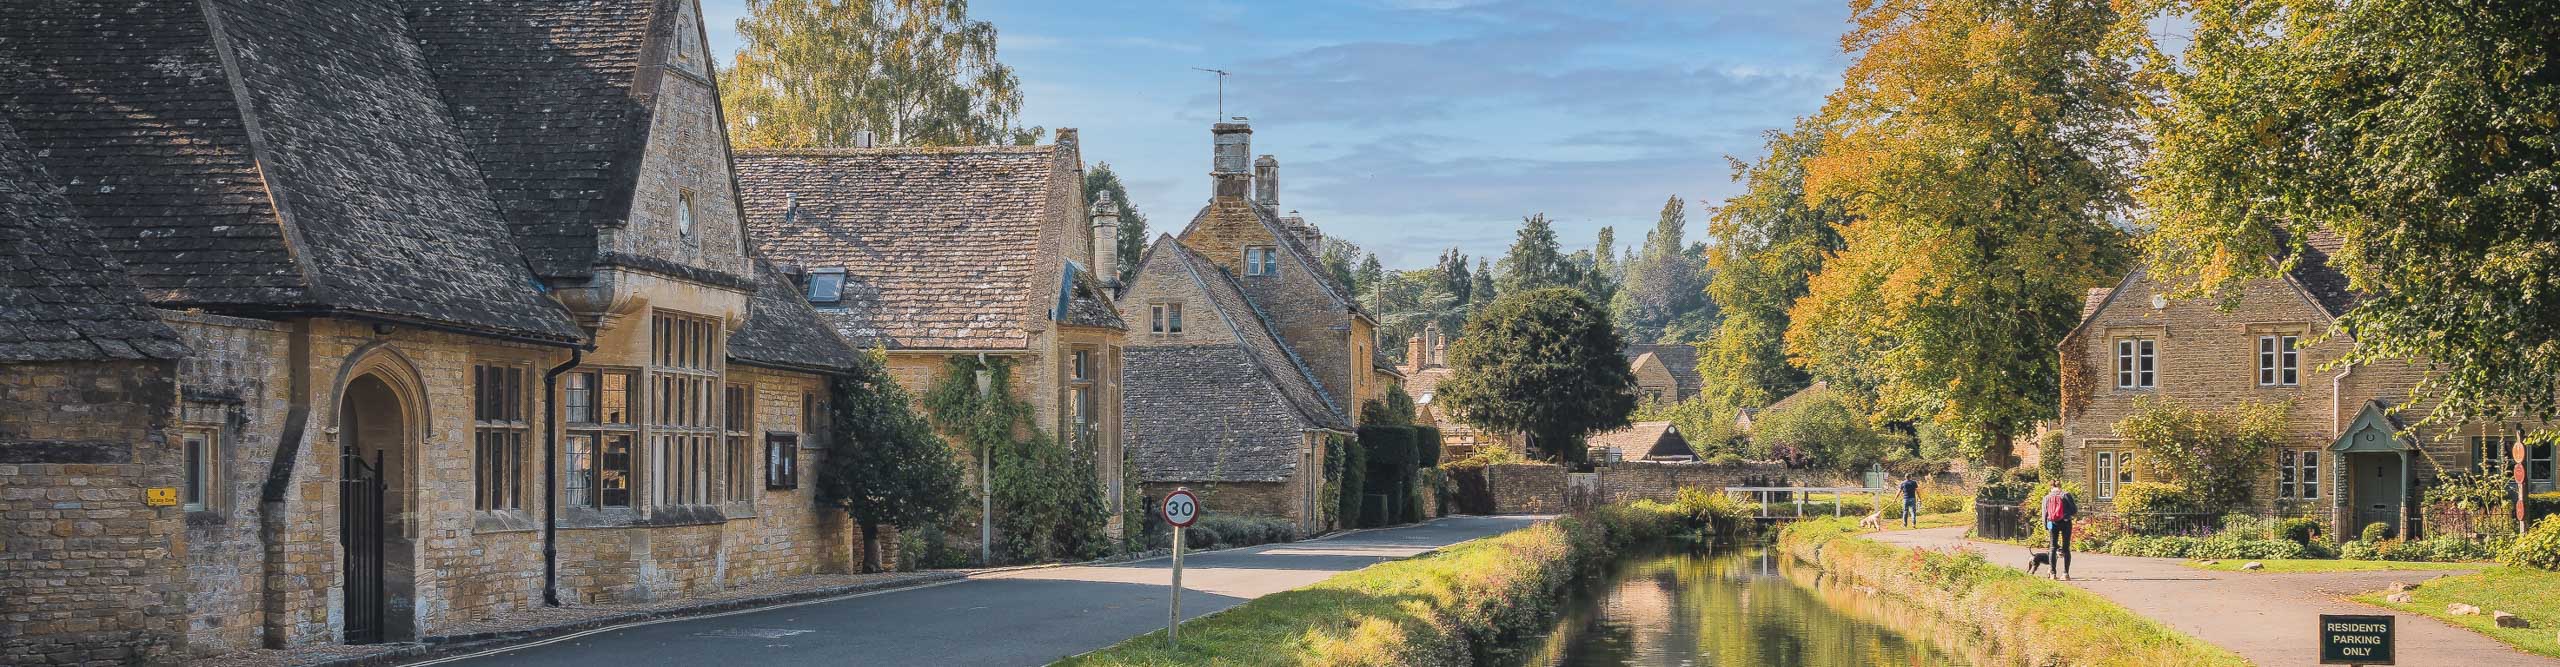 Stone cottages alongside a small rive in the Cotswolds, England 